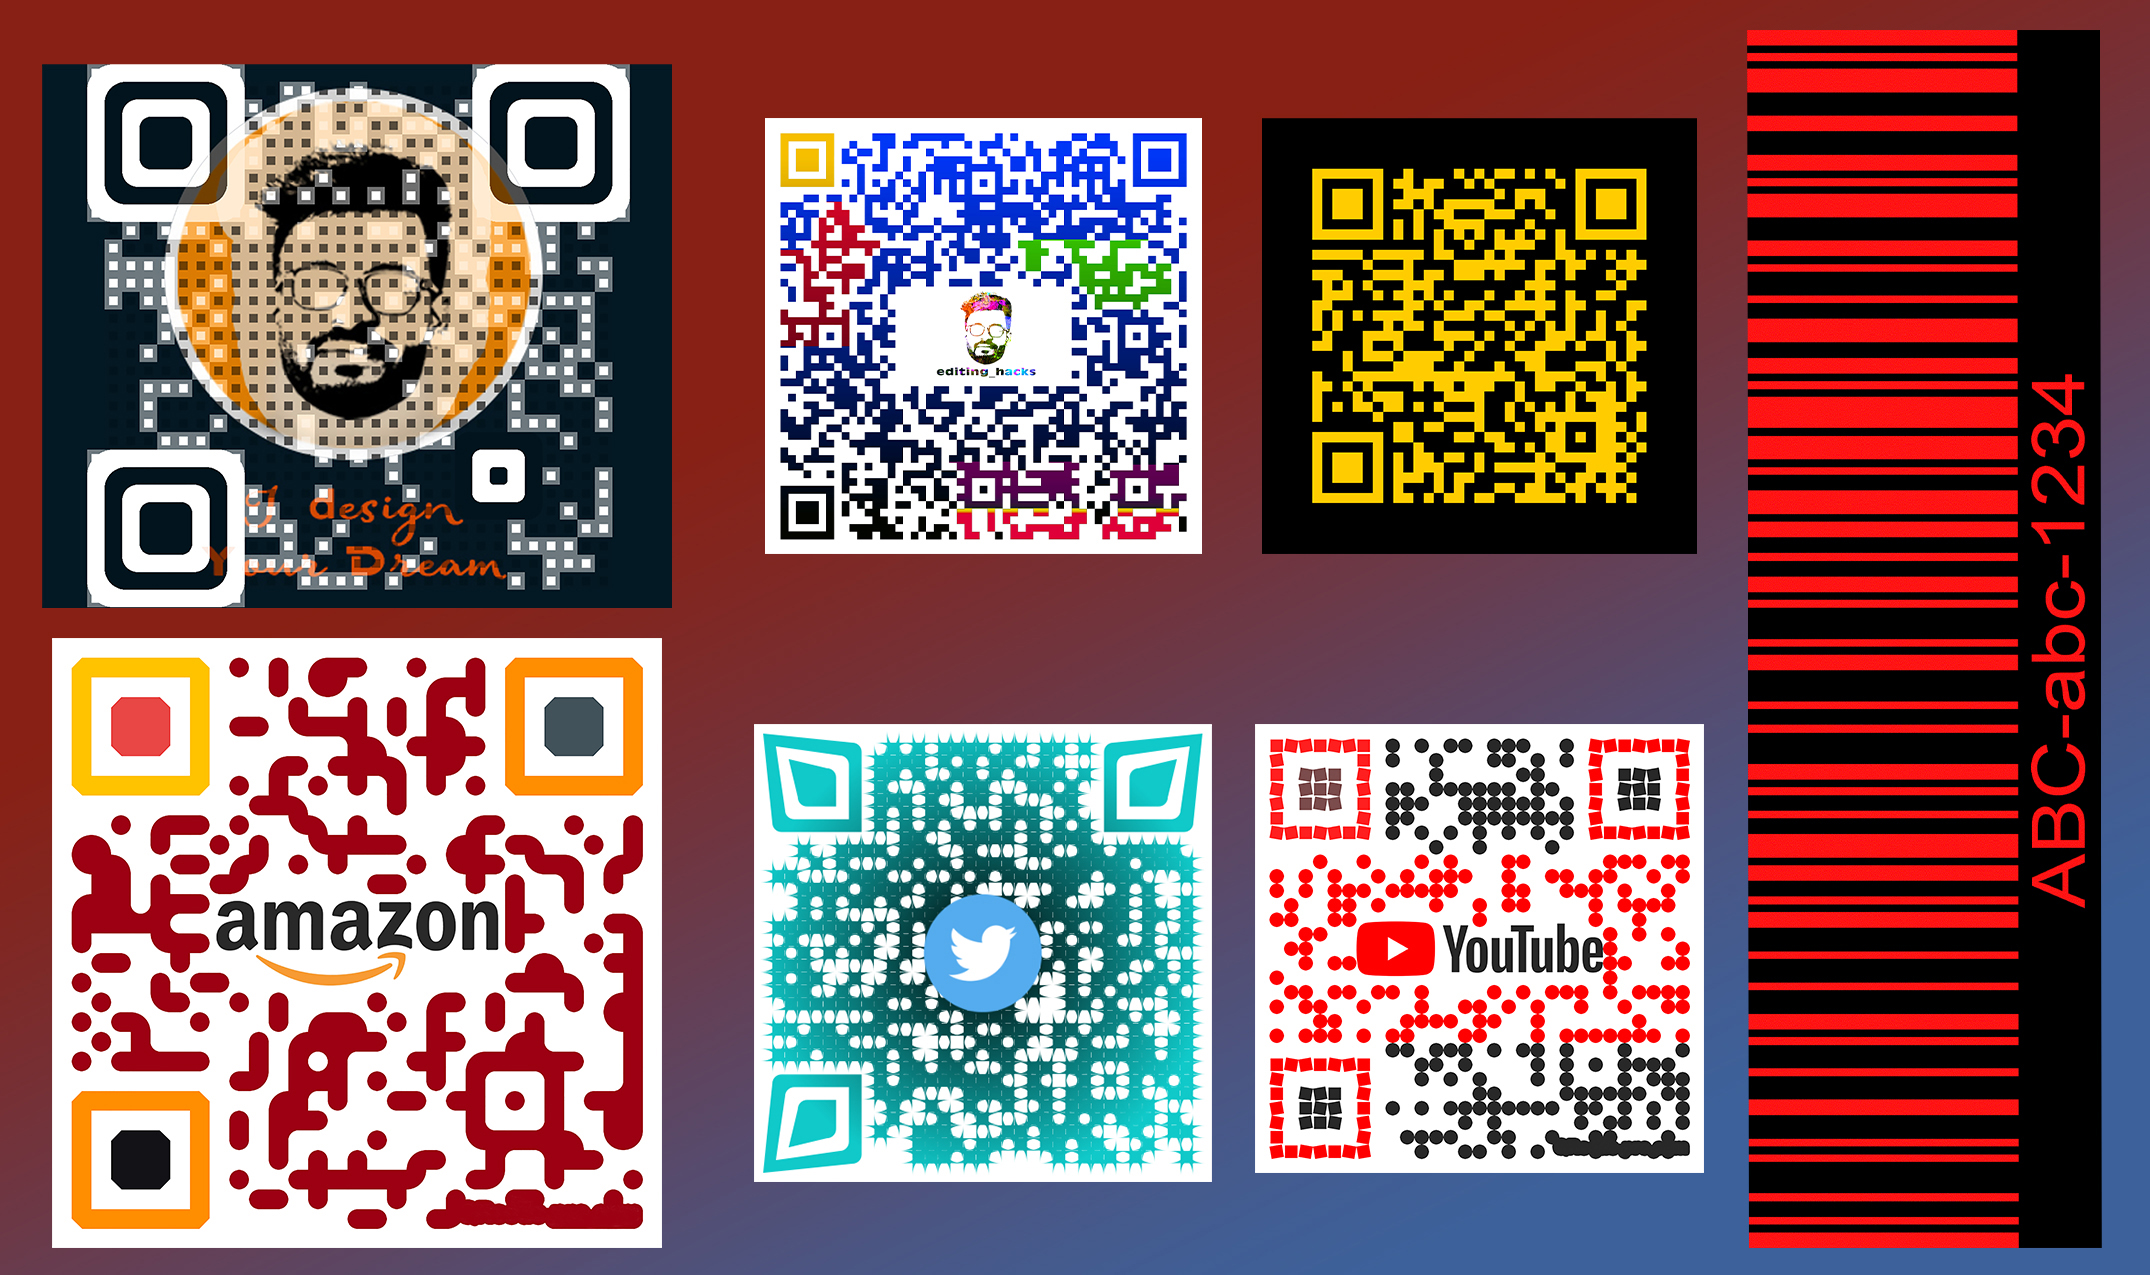 Qr Code For Website : File:Qr-nl-wikipedia-or.svg - Wikimedia Commons